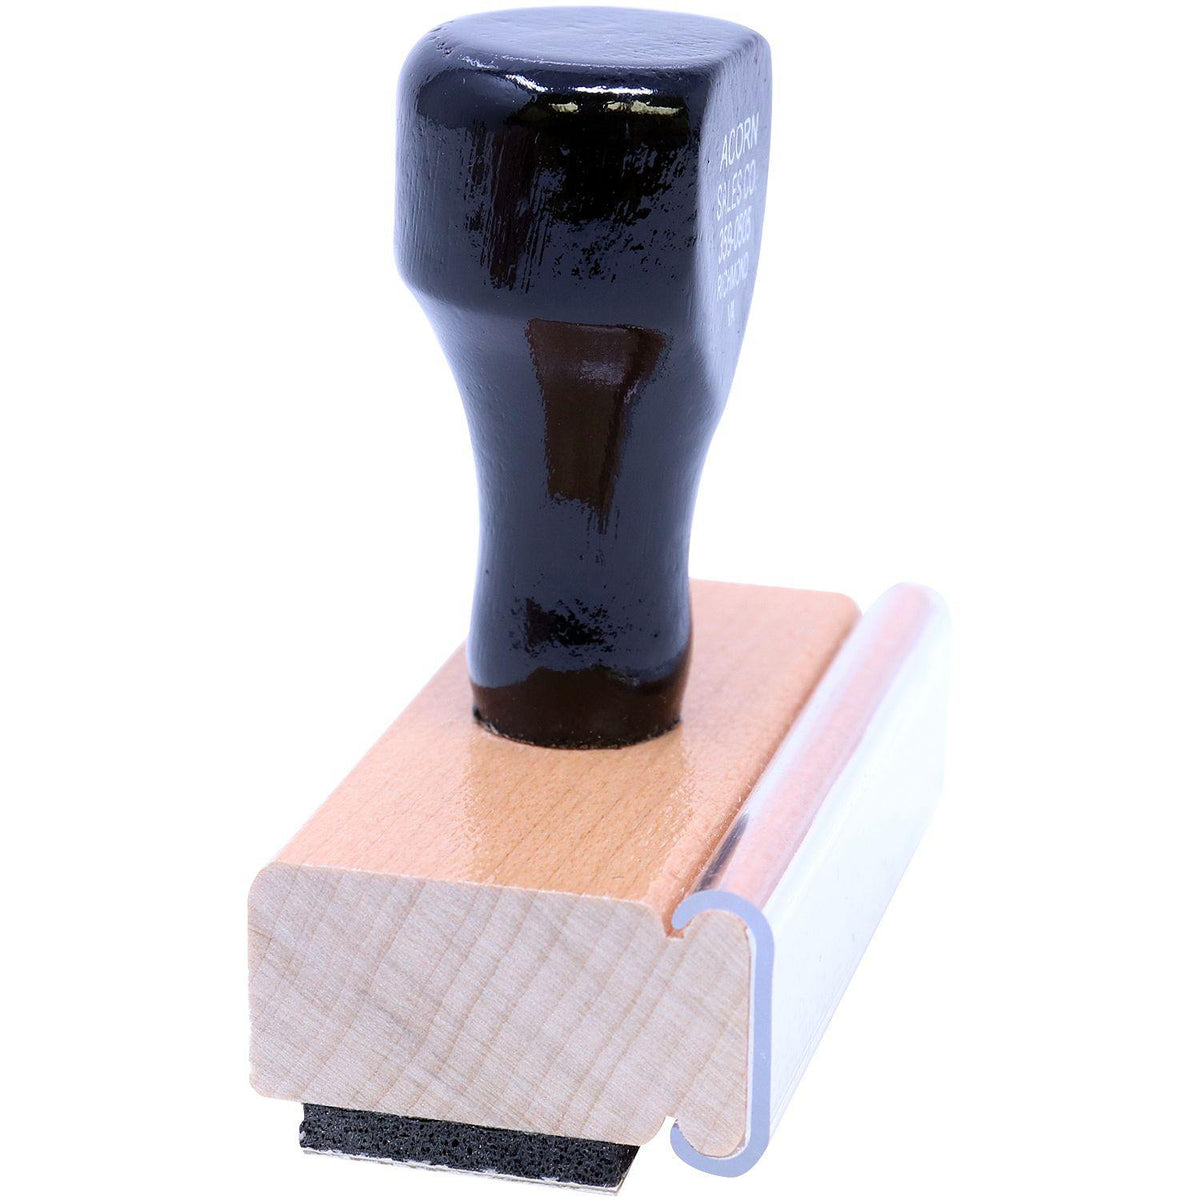 Medical Hmo Ppo Rubber Stamp - Engineer Seal Stamps - Brand_Acorn, Impression Size_Small, Stamp Type_Regular Stamp, Type of Use_Medical Office